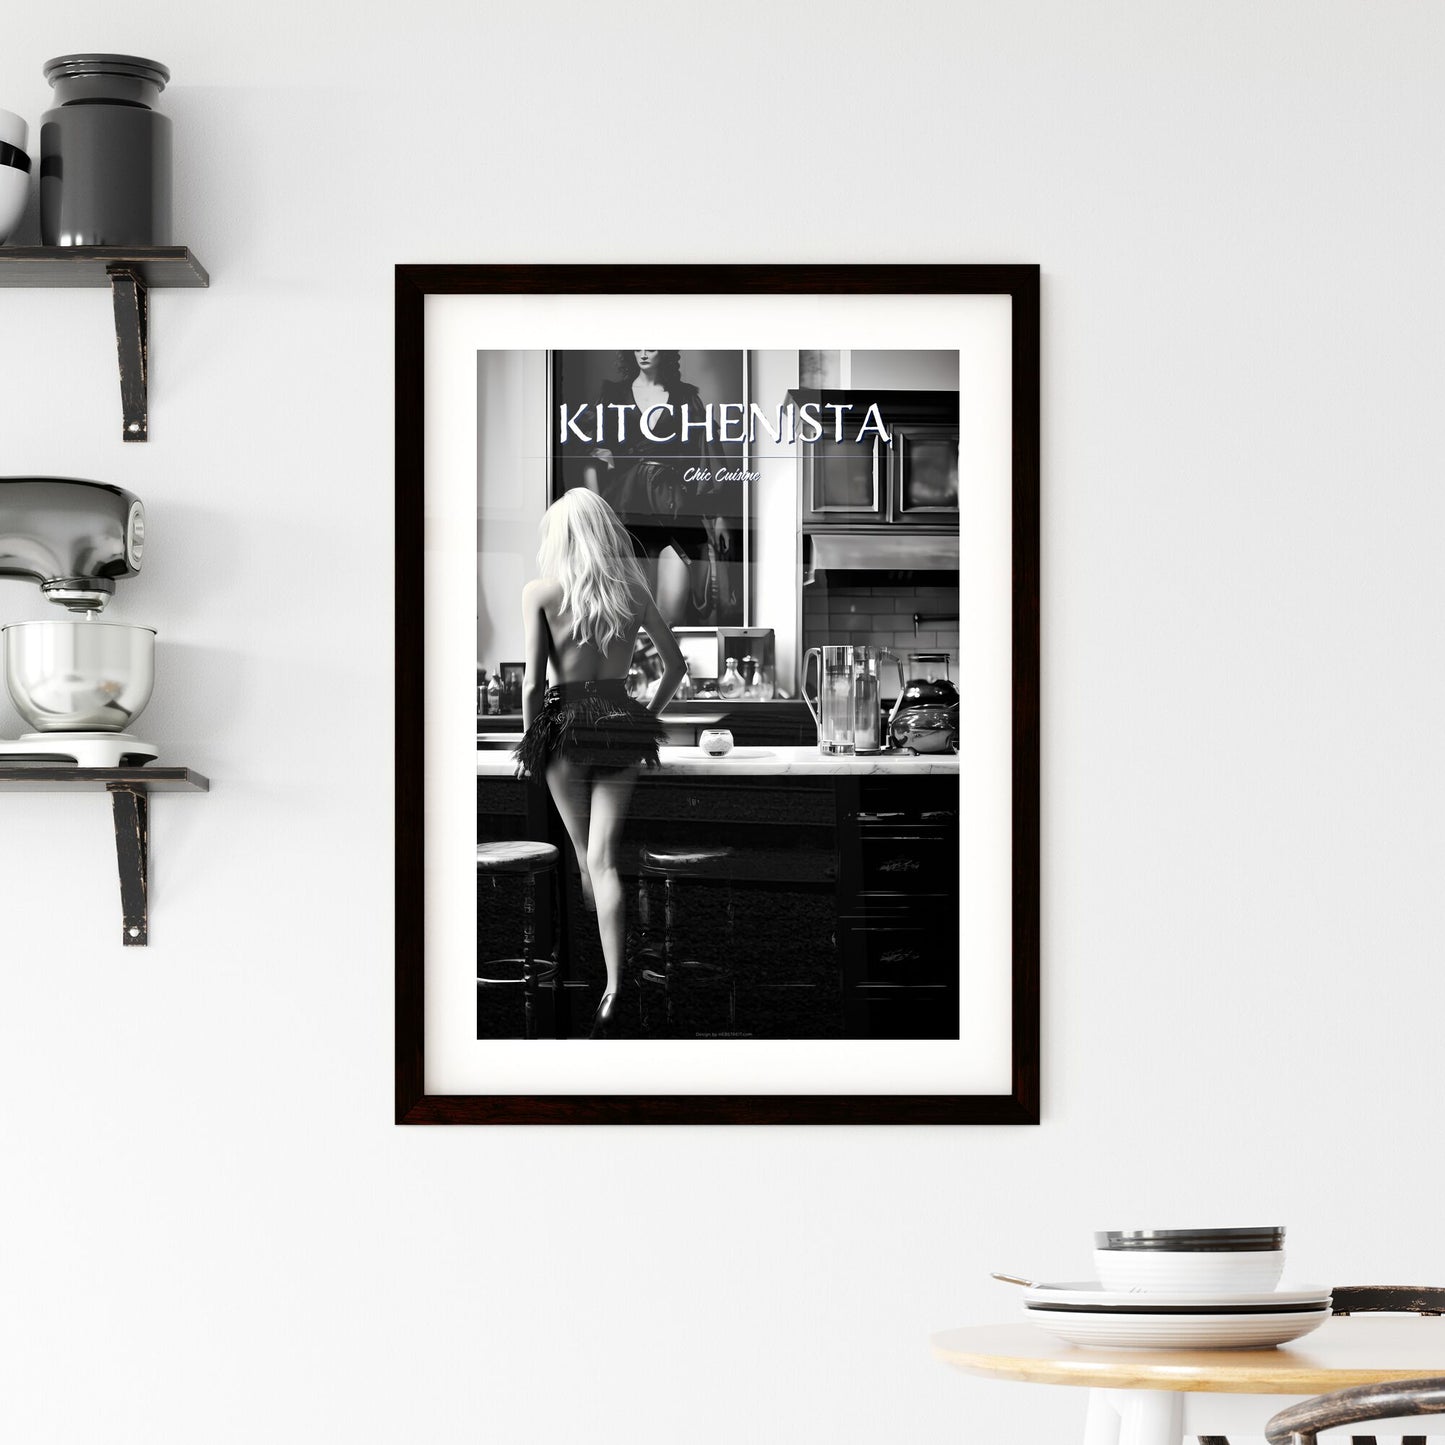 A Poster of leather goddess in a tres chic kitchen - A Woman Standing On A Counter Default Title